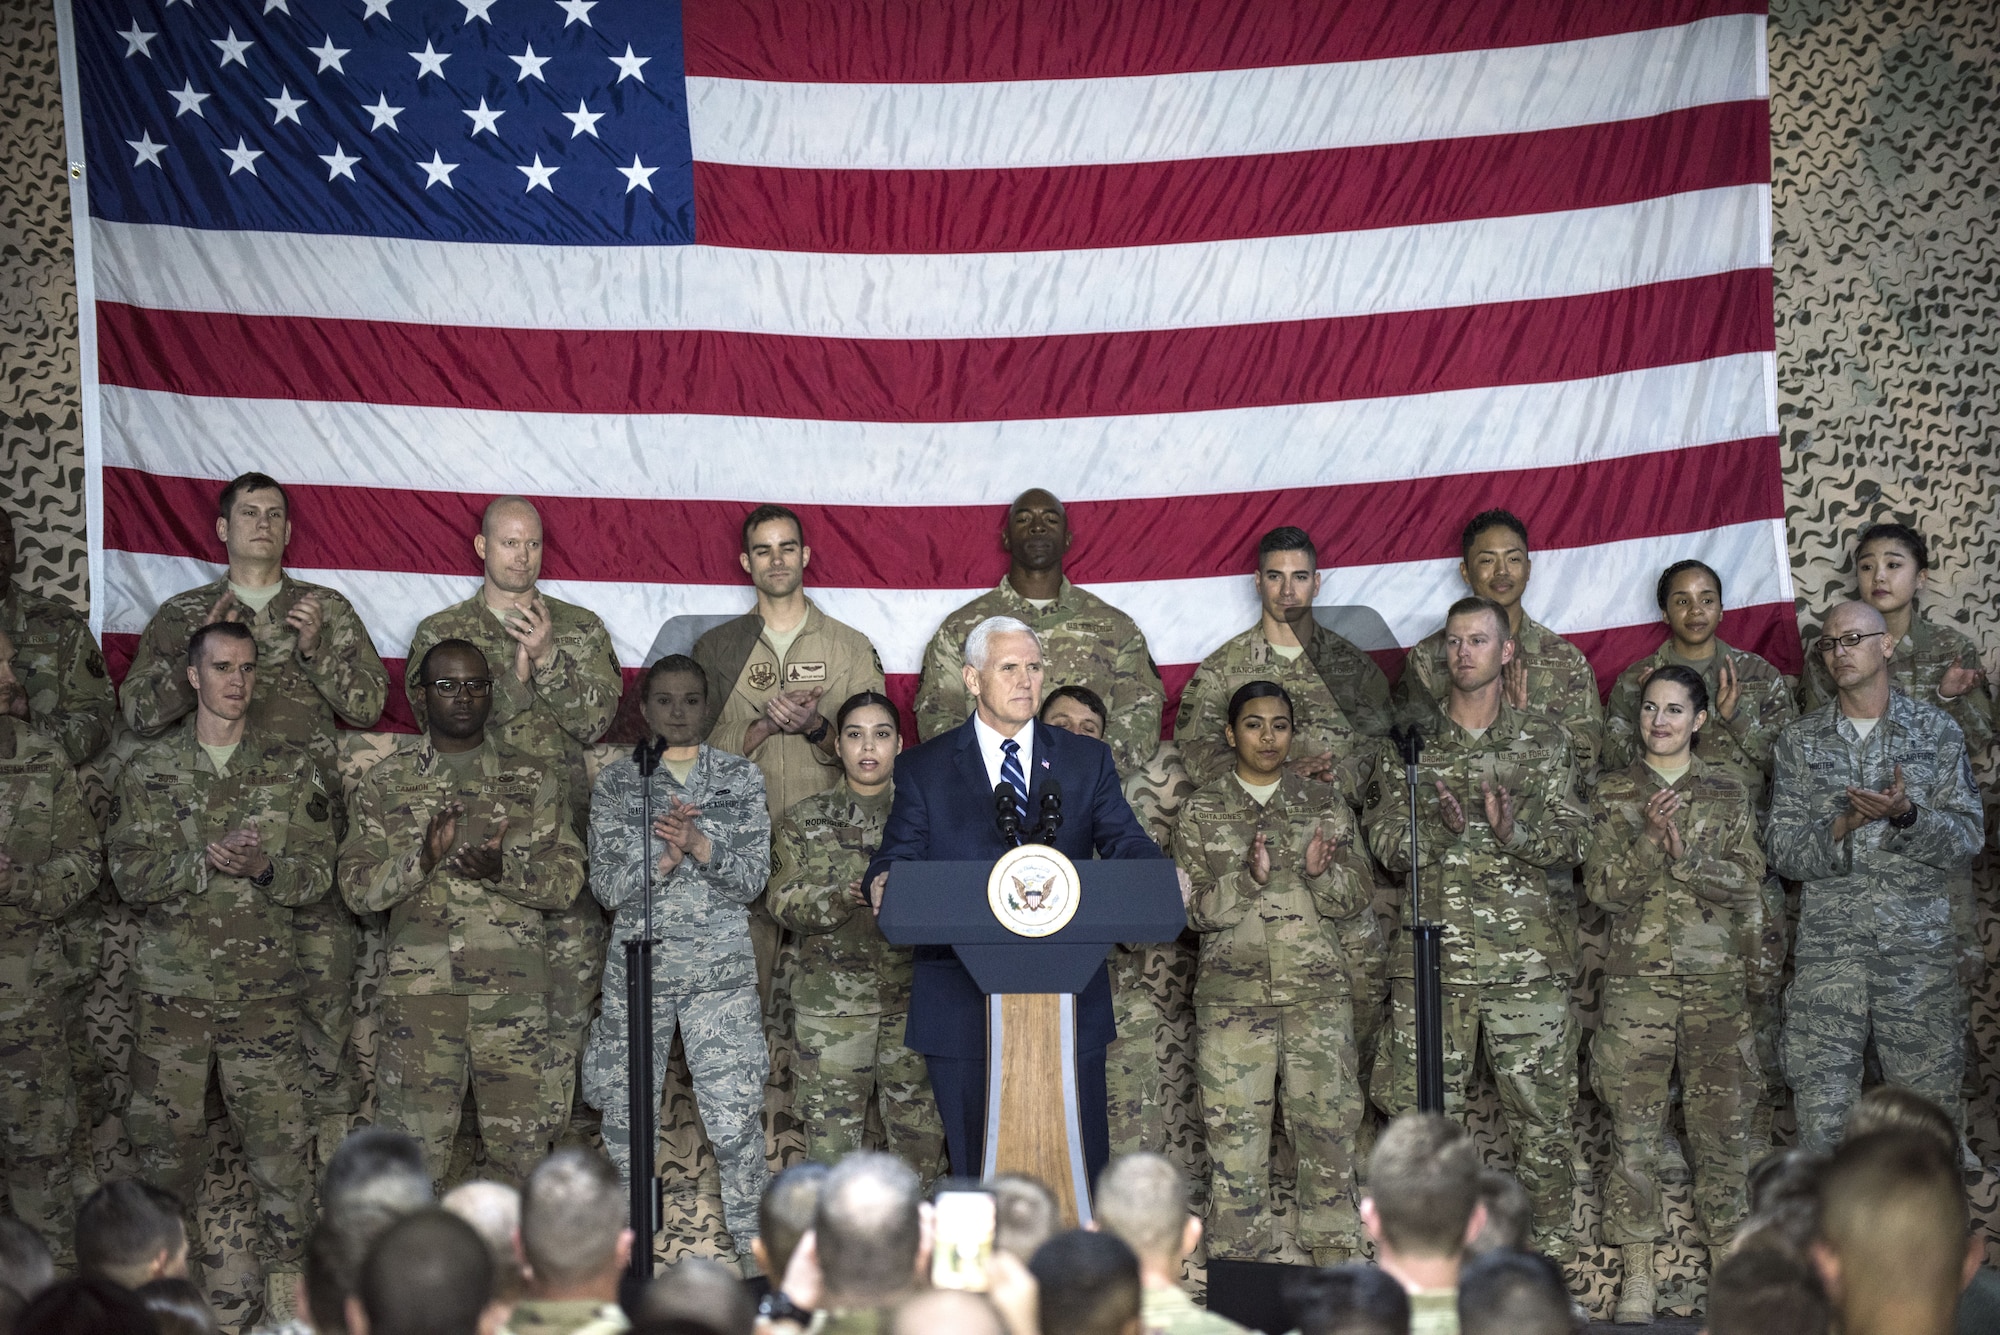 U.S. Vice President Mike Pence speaks to a crowd of deployed service members assigned to the 332d Air Expeditionary Wing January 21, 2018 at an undisclosed location in Southwest Asia. Pence’s visit came as part of an extended trip across the Middle East, during which he reaffirmed the U.S. military’s commitment to defeating dangerous radicalism throughout the region.  (U.S. Air Force photo by Staff Sgt. Joshua Kleinholz)